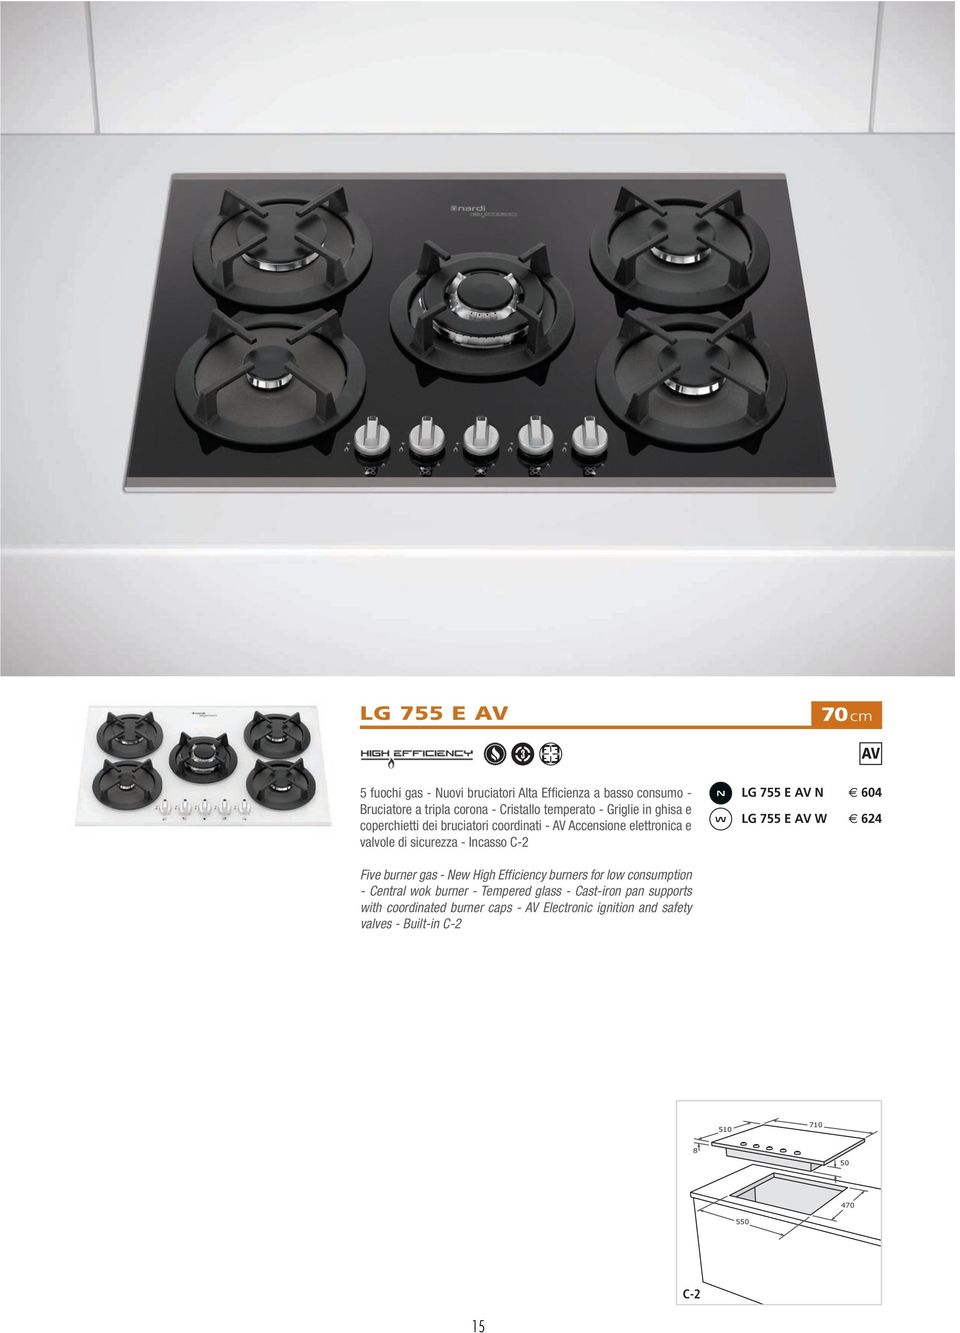 N 604 W LG 755 E W 624 Five burner gas - New High Efficiency burners for low consumption - Central wok burner - Tempered glass -